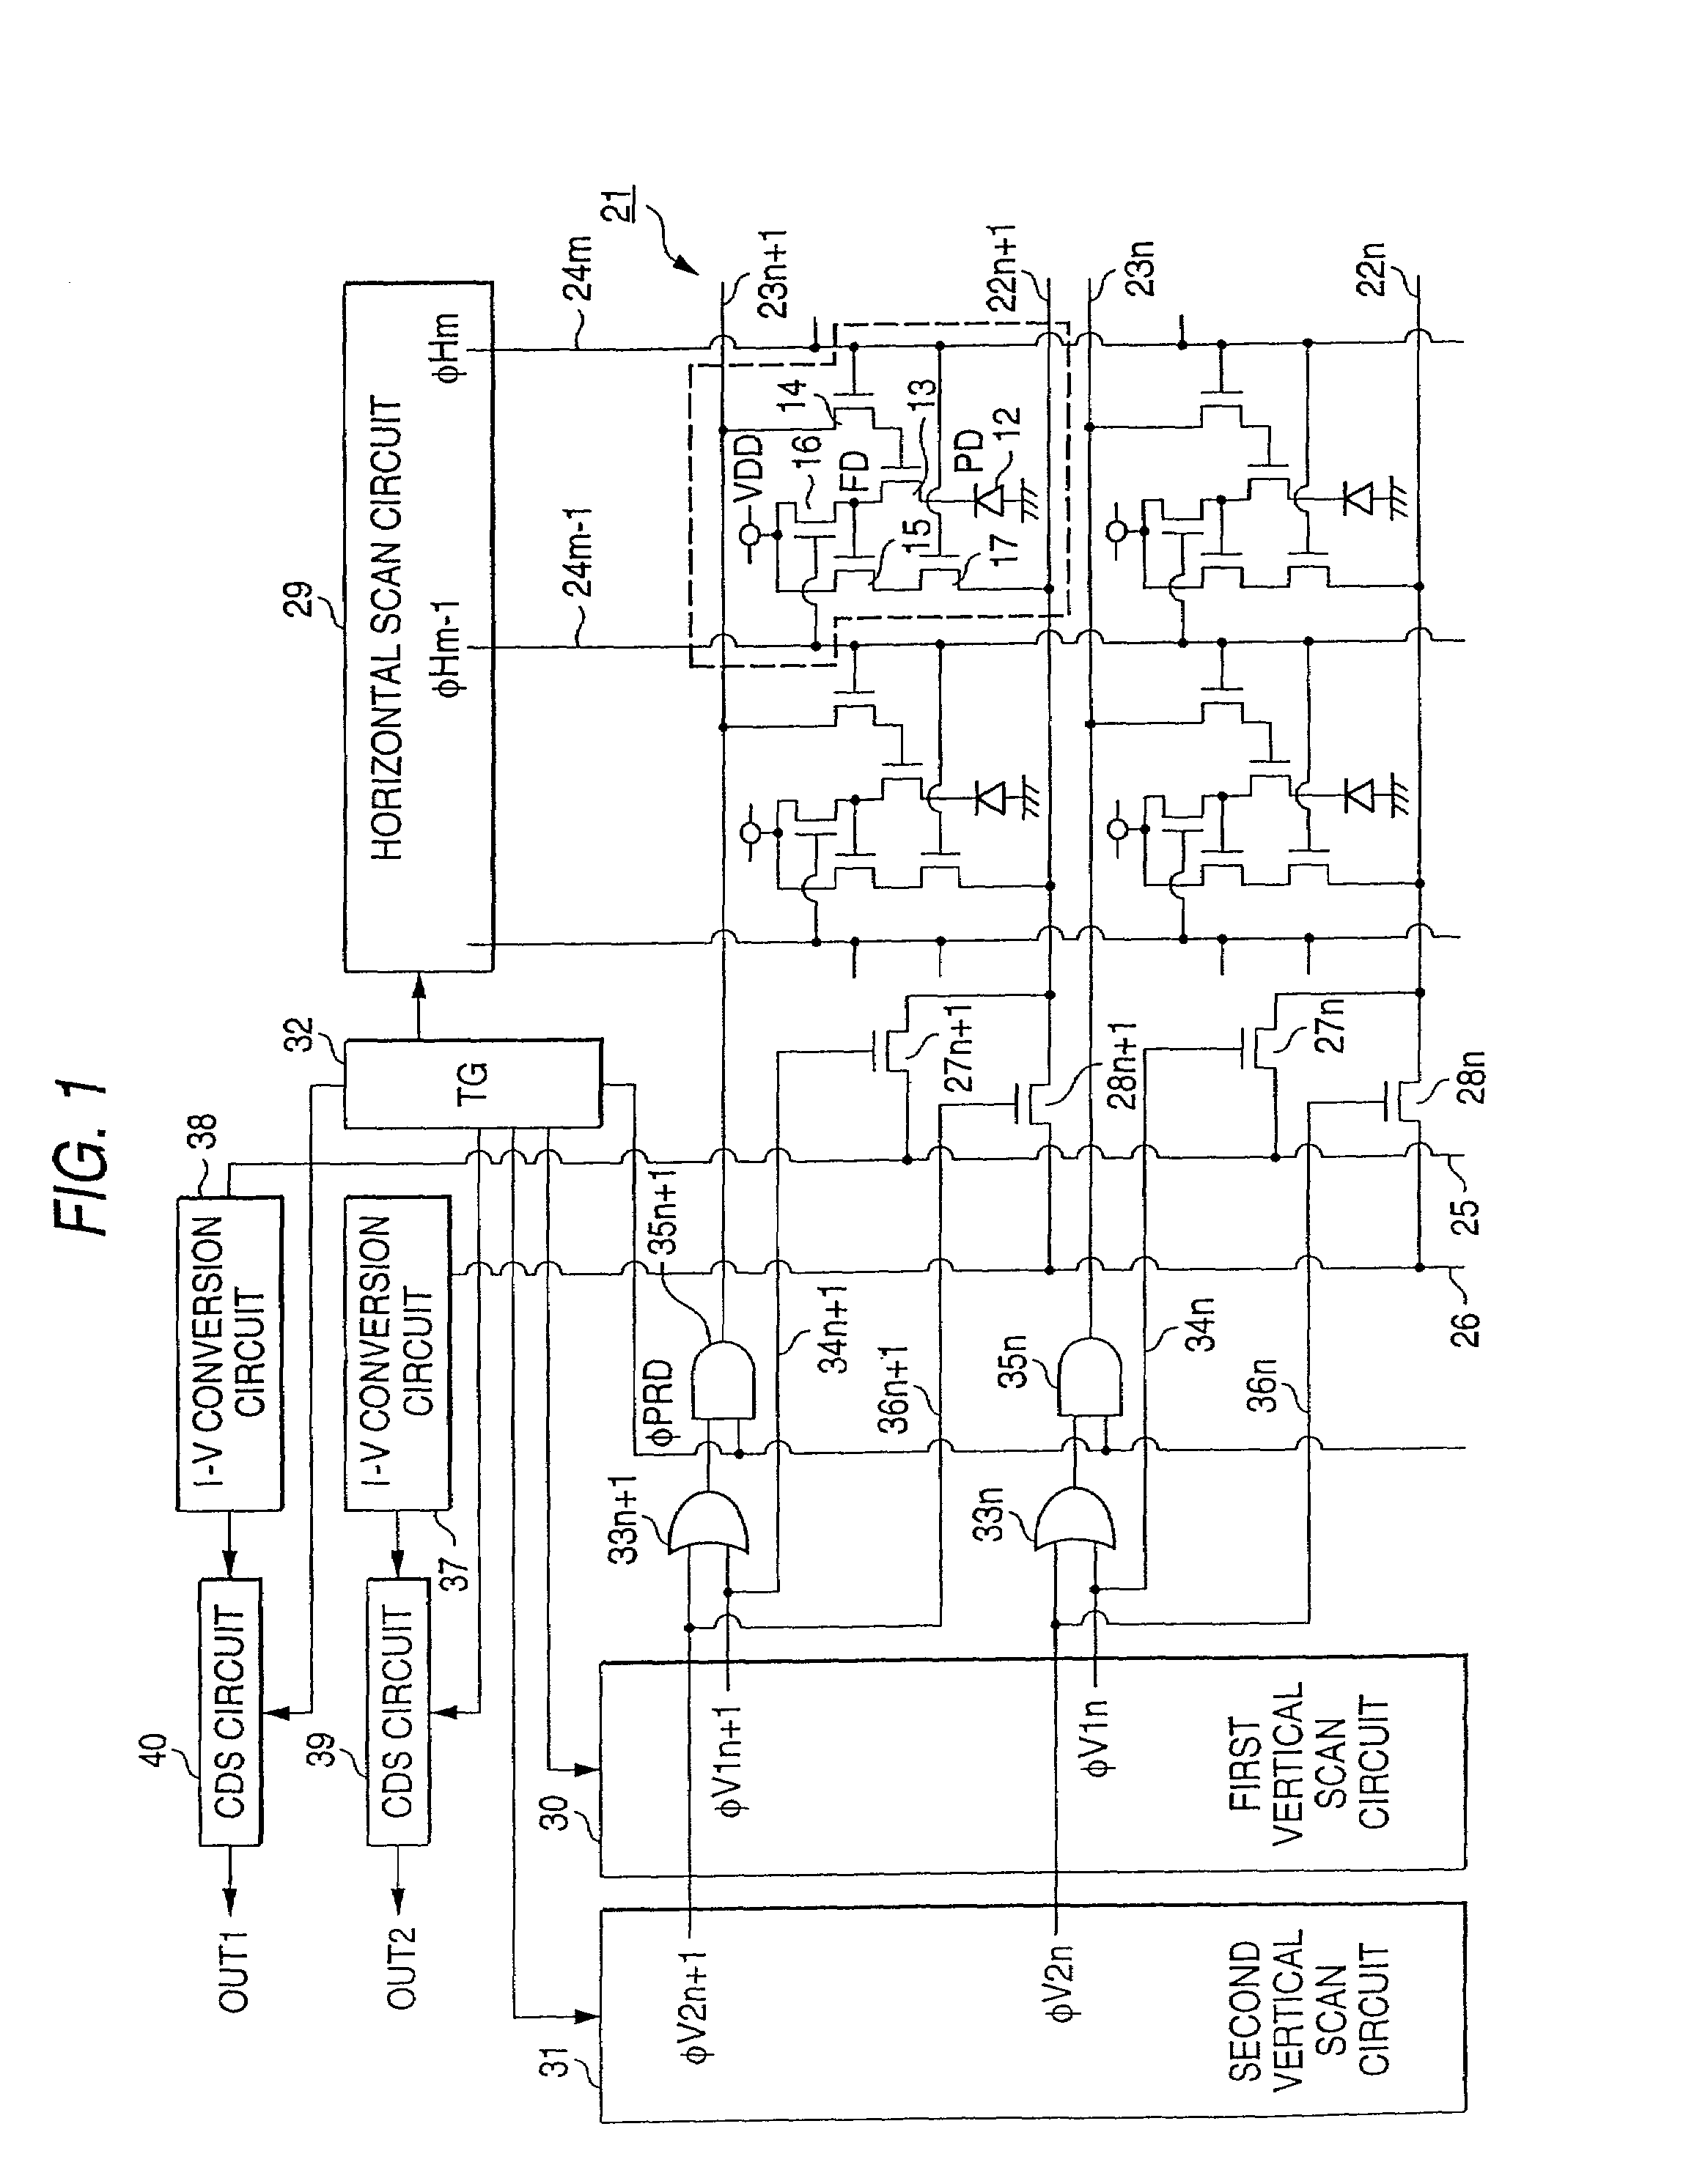 Solid-state imaging pickup device with vertical and horizontal driving means for a unit pixel